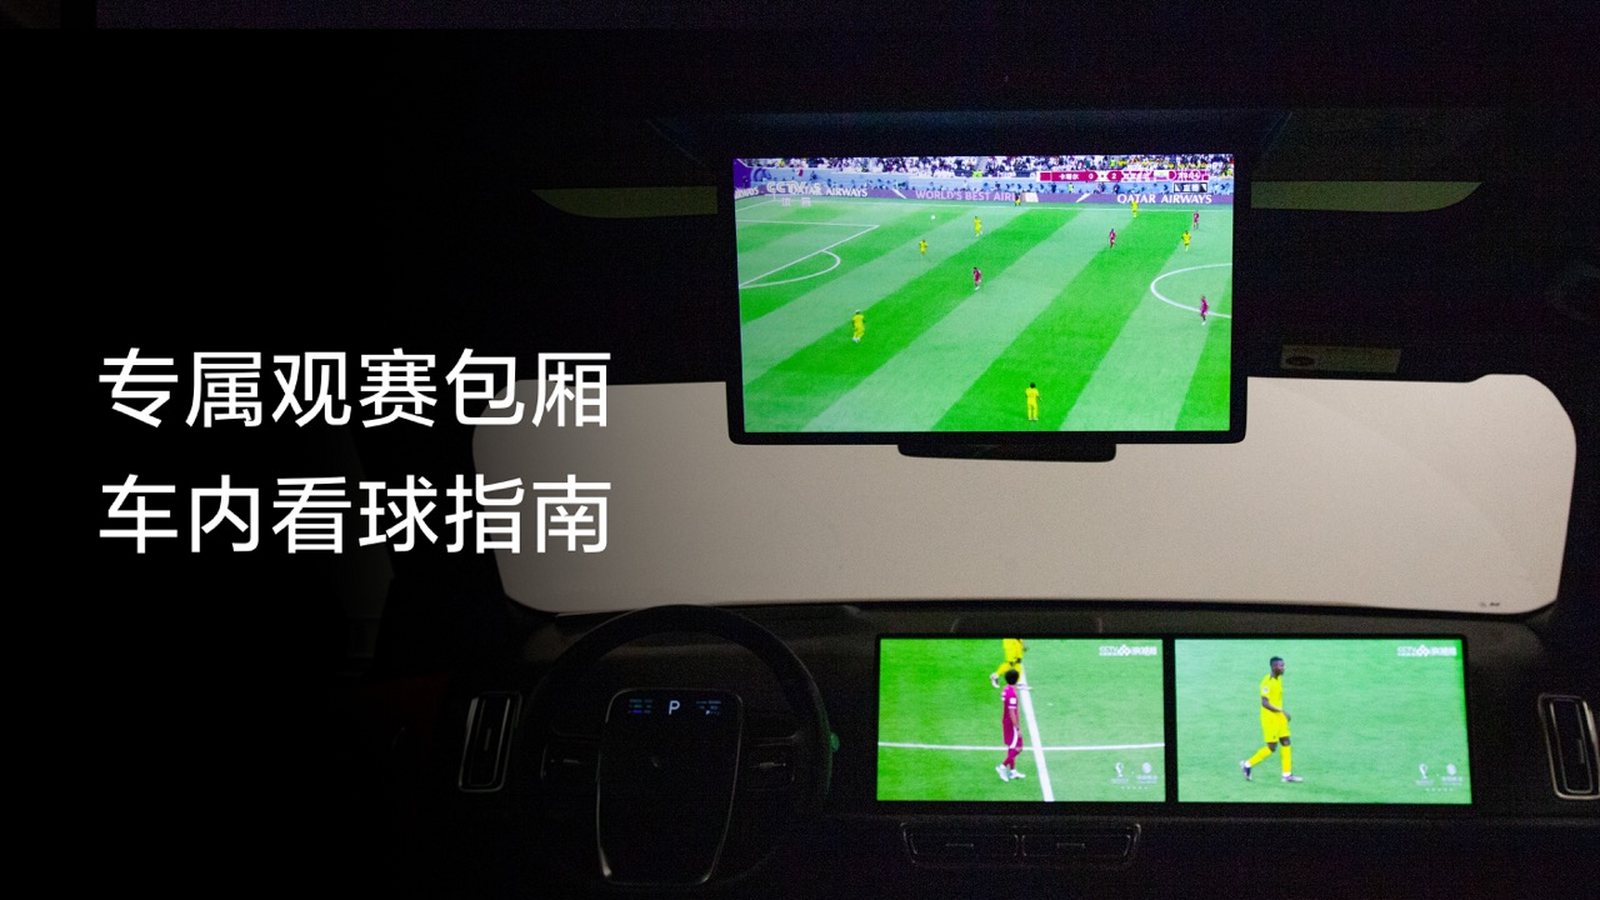 Guide to watching ball games in the car! A new experience with three screens and multiple angles.